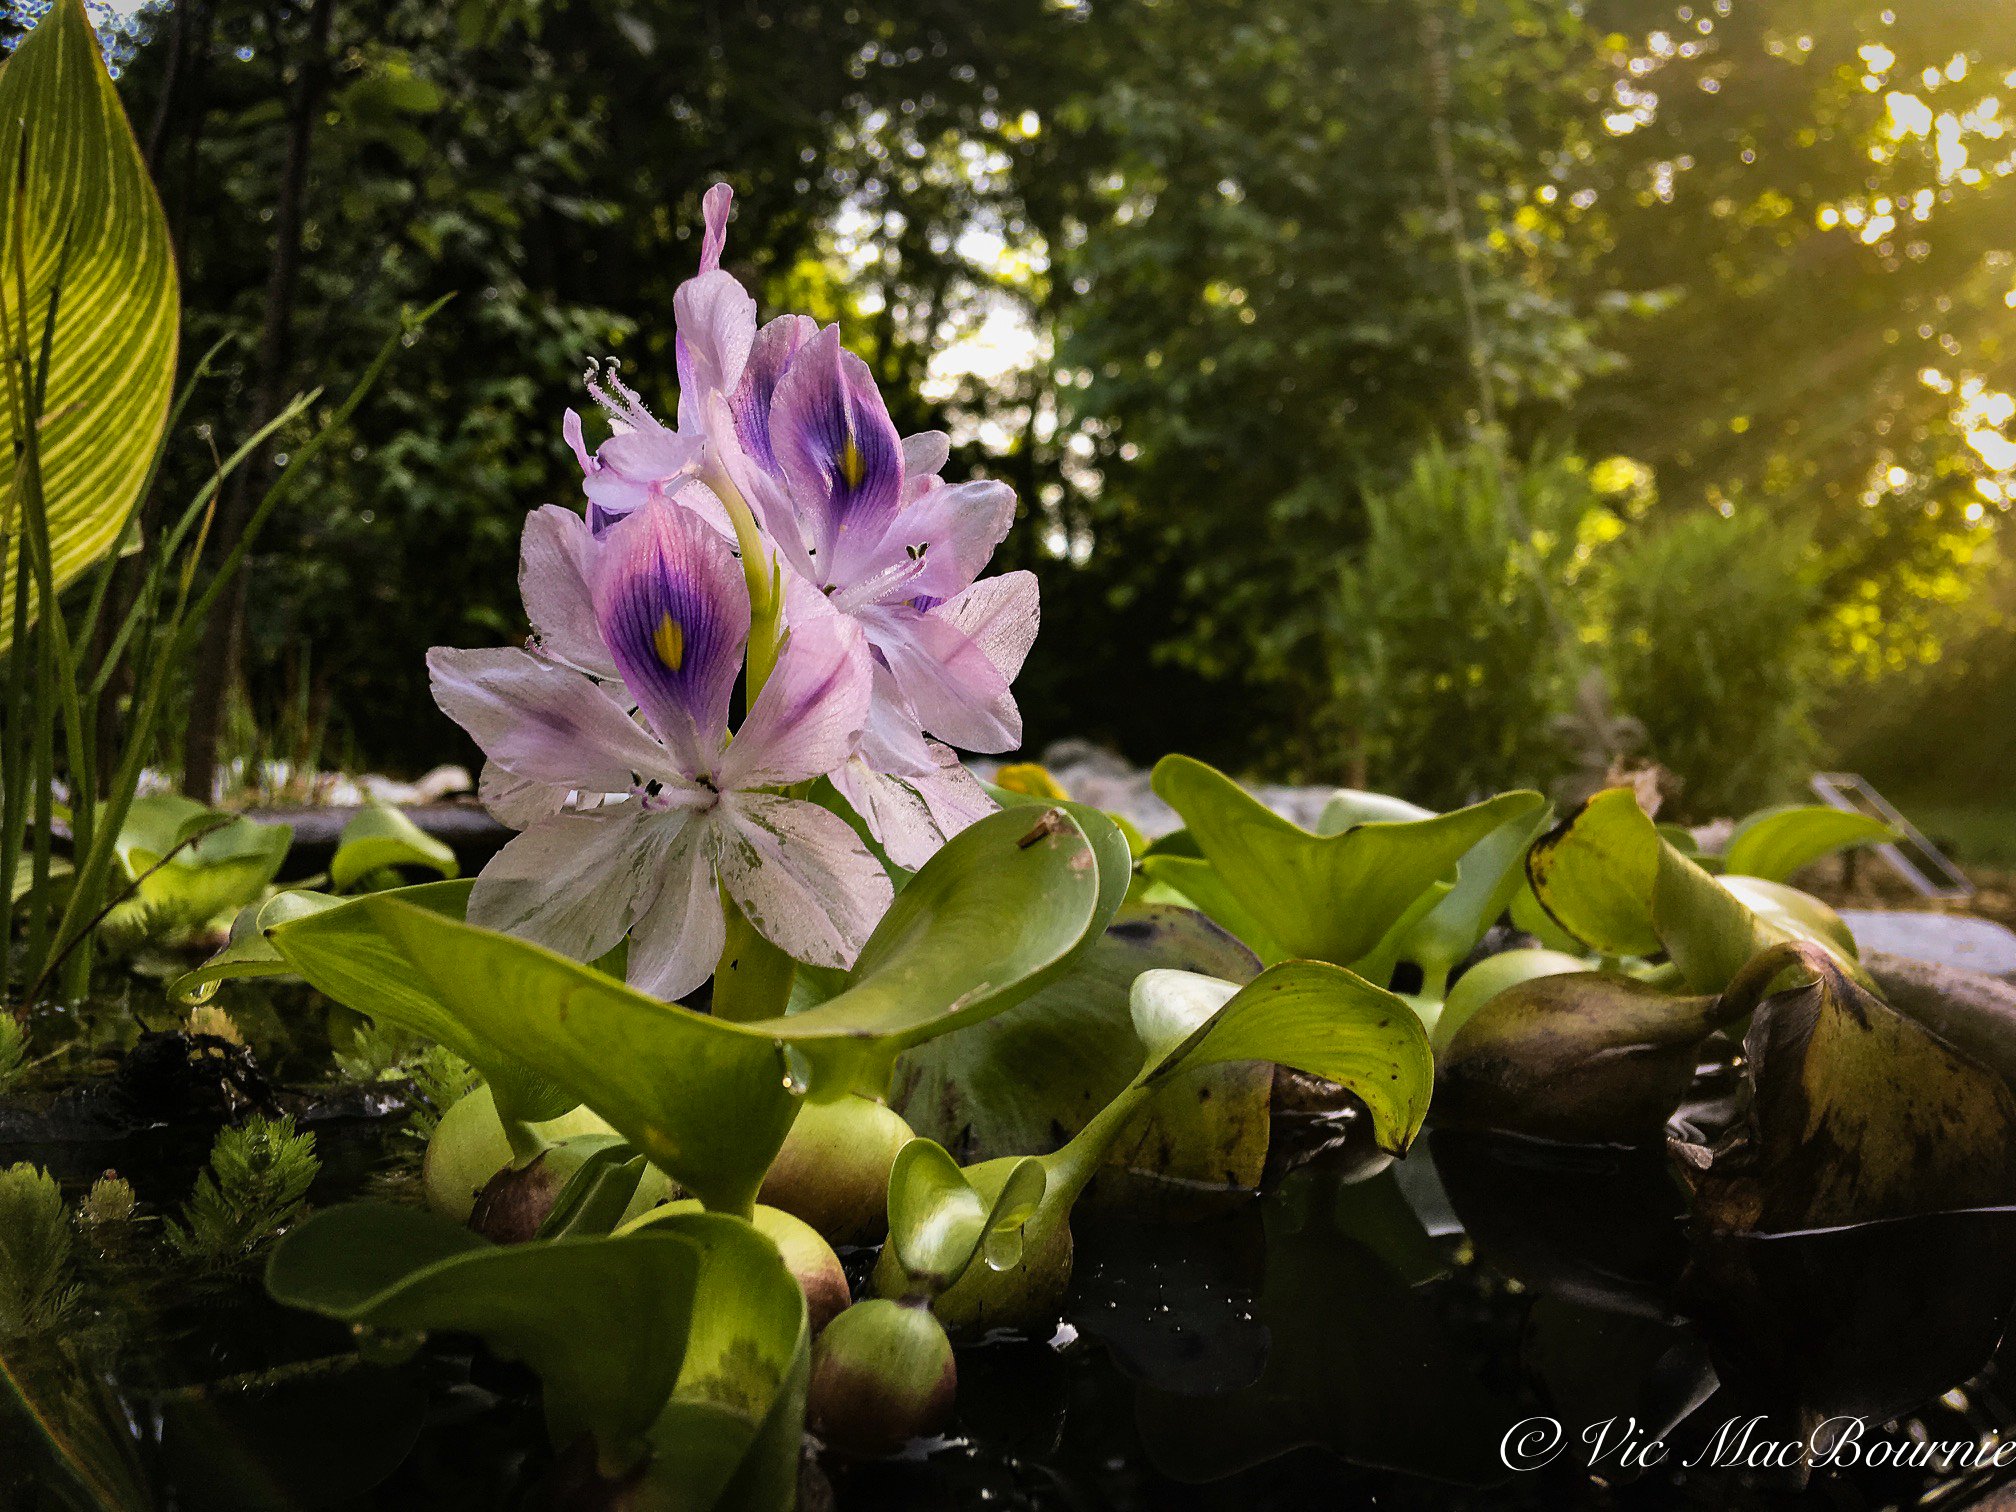 Early morning sun on the Water hyacinth